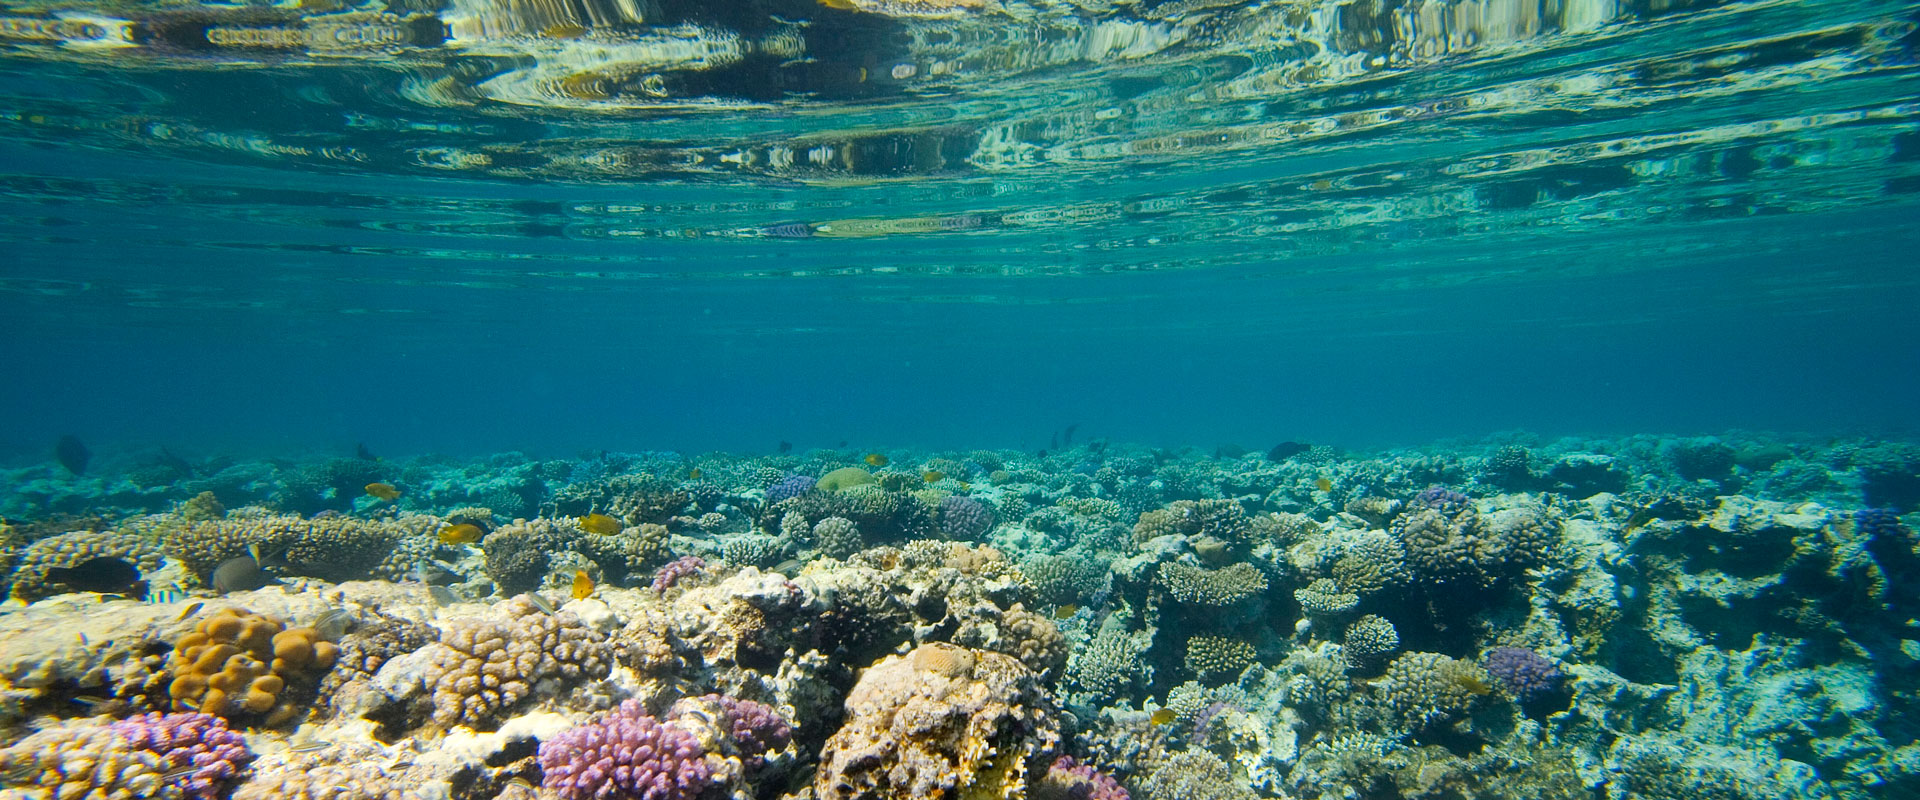 Experts say it's not too late to save the world's coral reefs